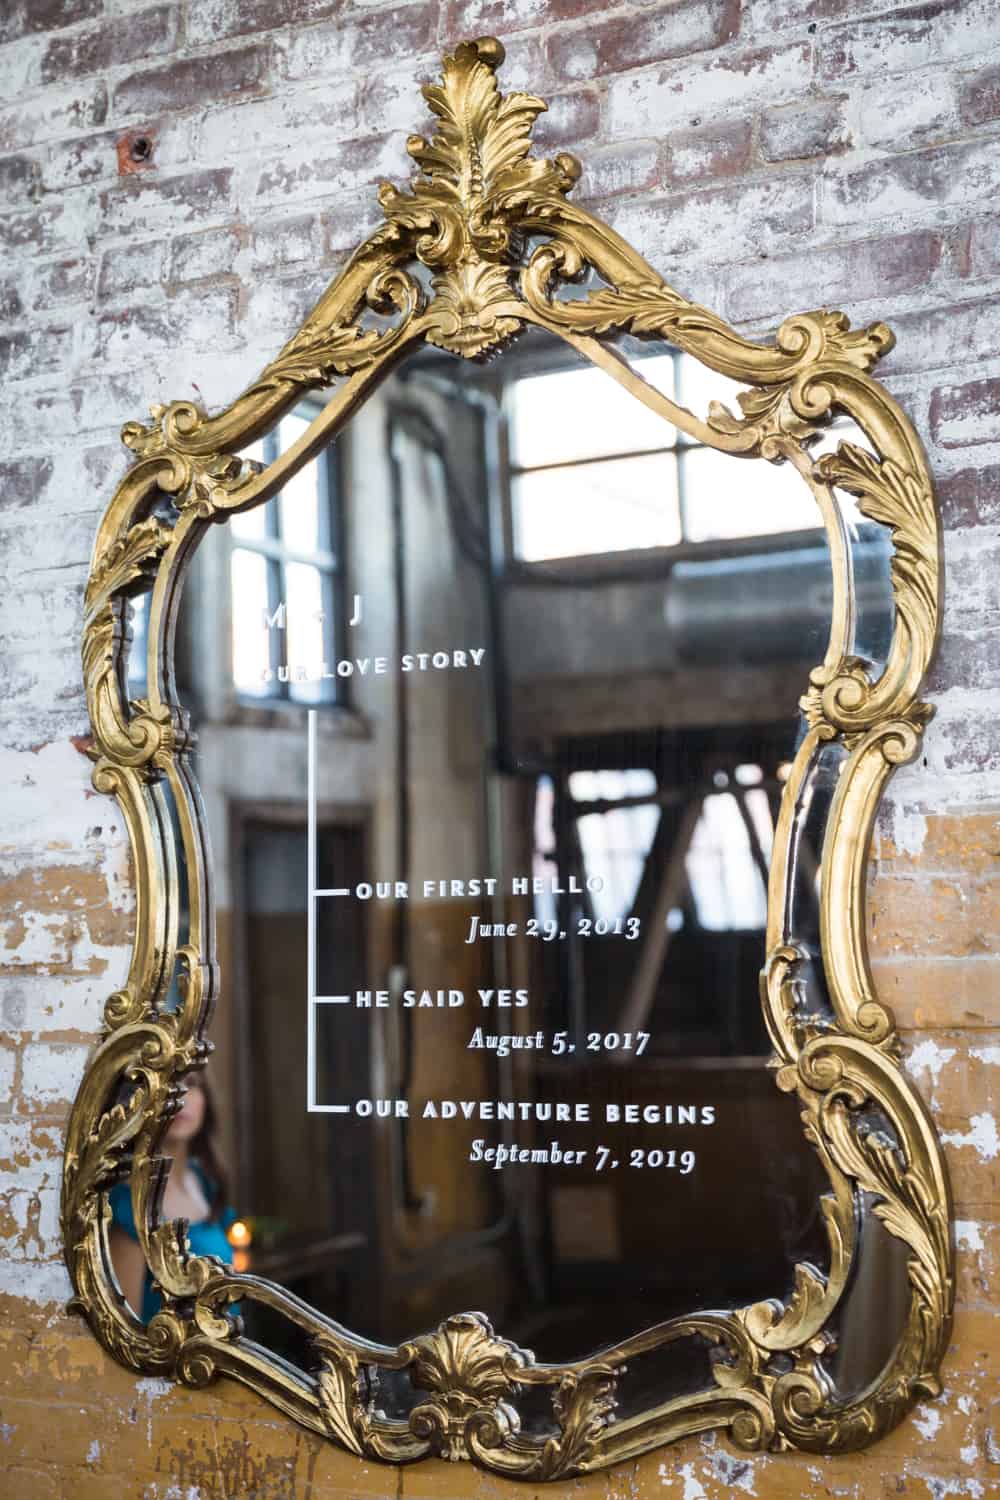 Gold-framed mirror on brick wall with love story timeline written on front of mirror